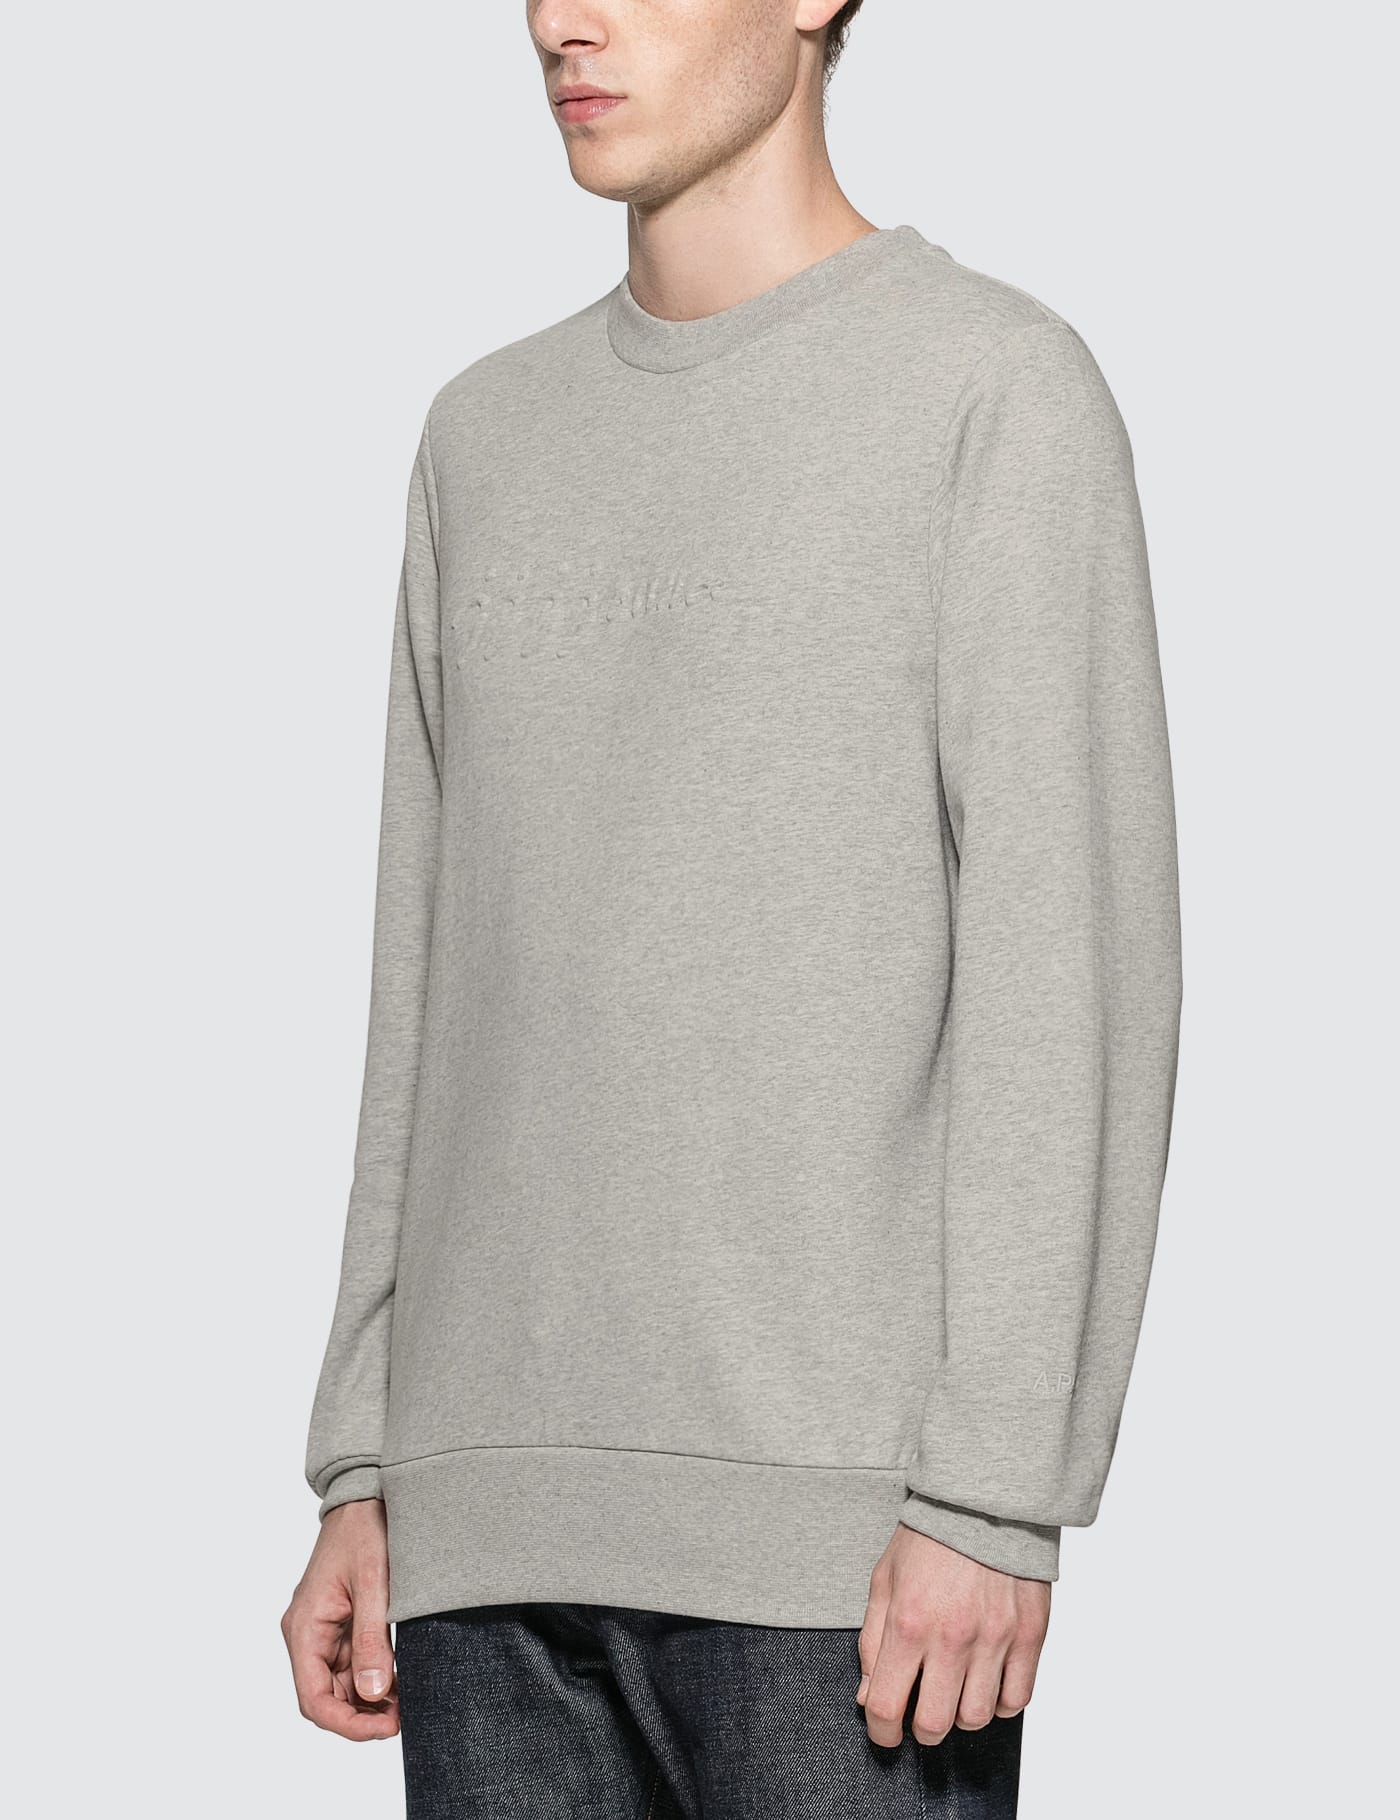 A.P.C. - A.P.C. x JJJJound Justin Sweatshirt | HBX - Globally Curated  Fashion and Lifestyle by Hypebeast